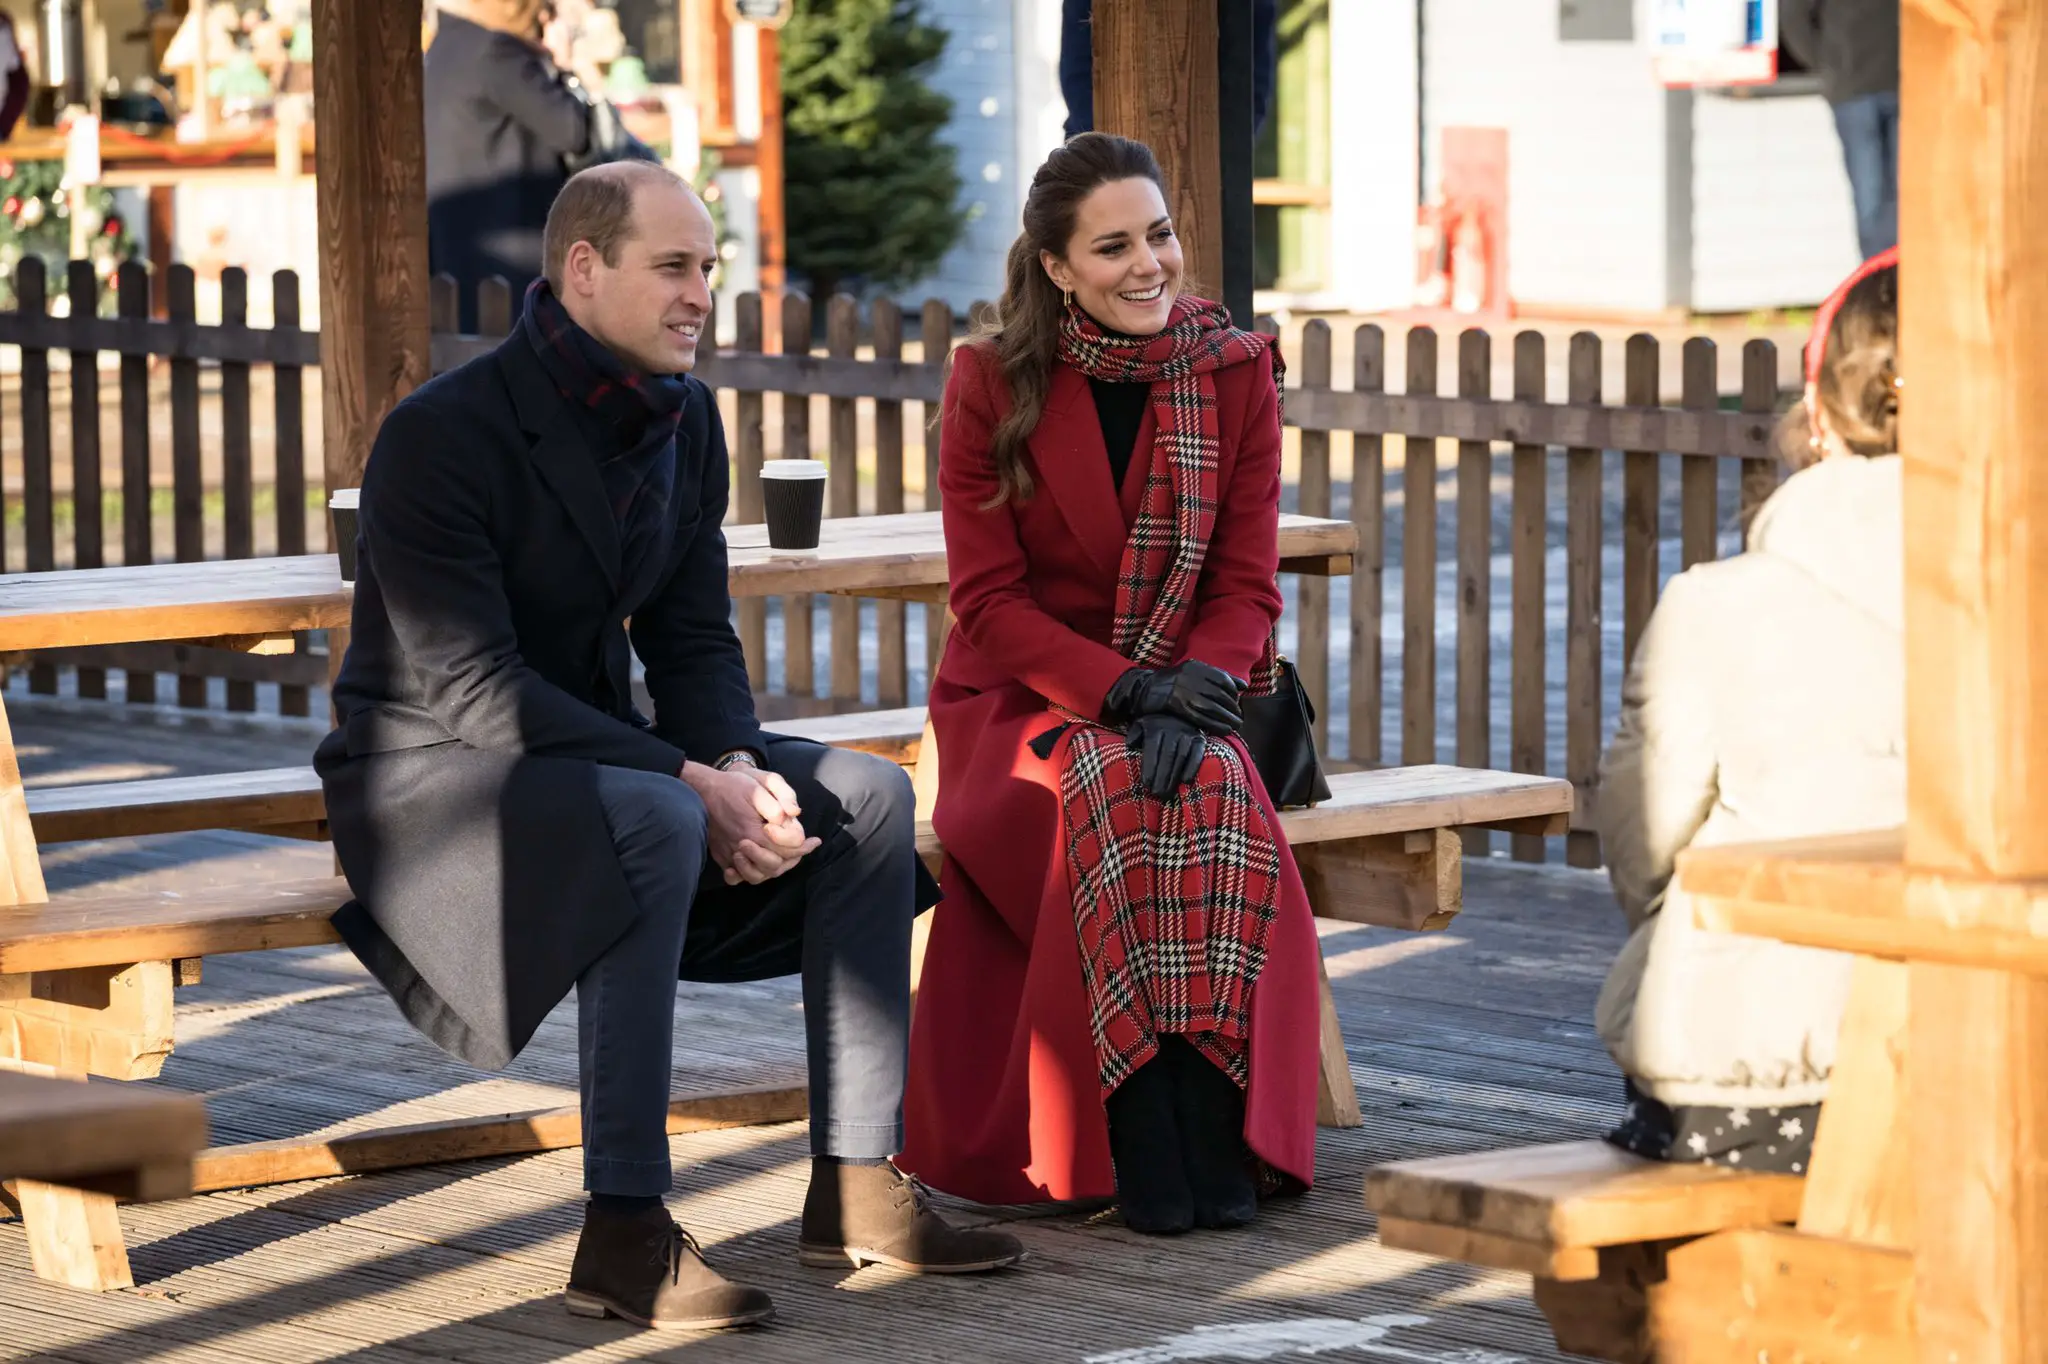 The Duke and Duchess of Cambridge arrived in Wales for the day three of Royal Train Tour